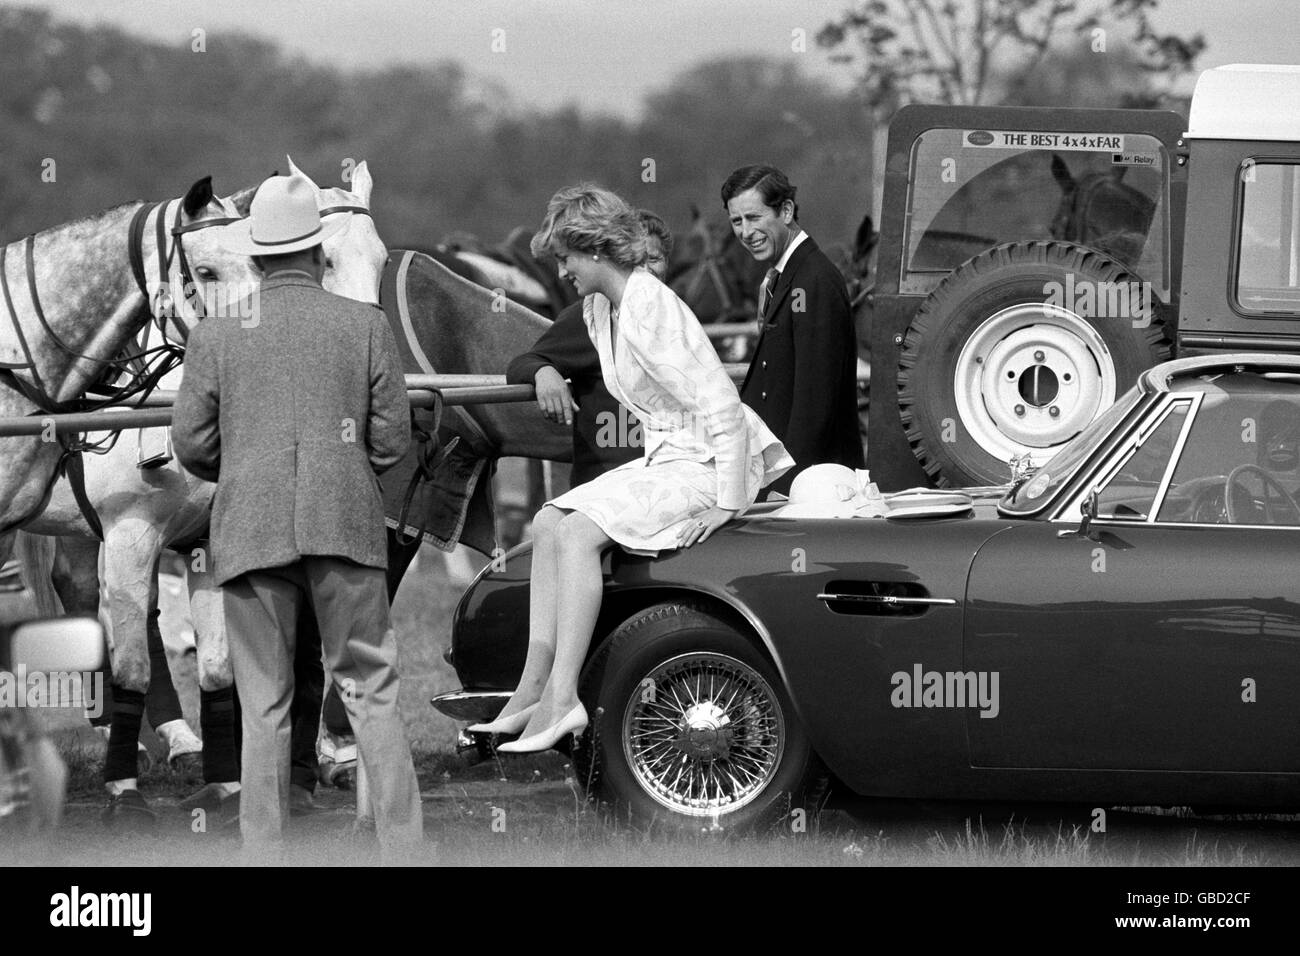 The Princess of Wales takes off her Ascot hat and takes a rest on the bonnet of her husband's Aston Martin car at a polo match at Smith's Lawn, Windsor. The Prince shares a joke as she does so. Stock Photo